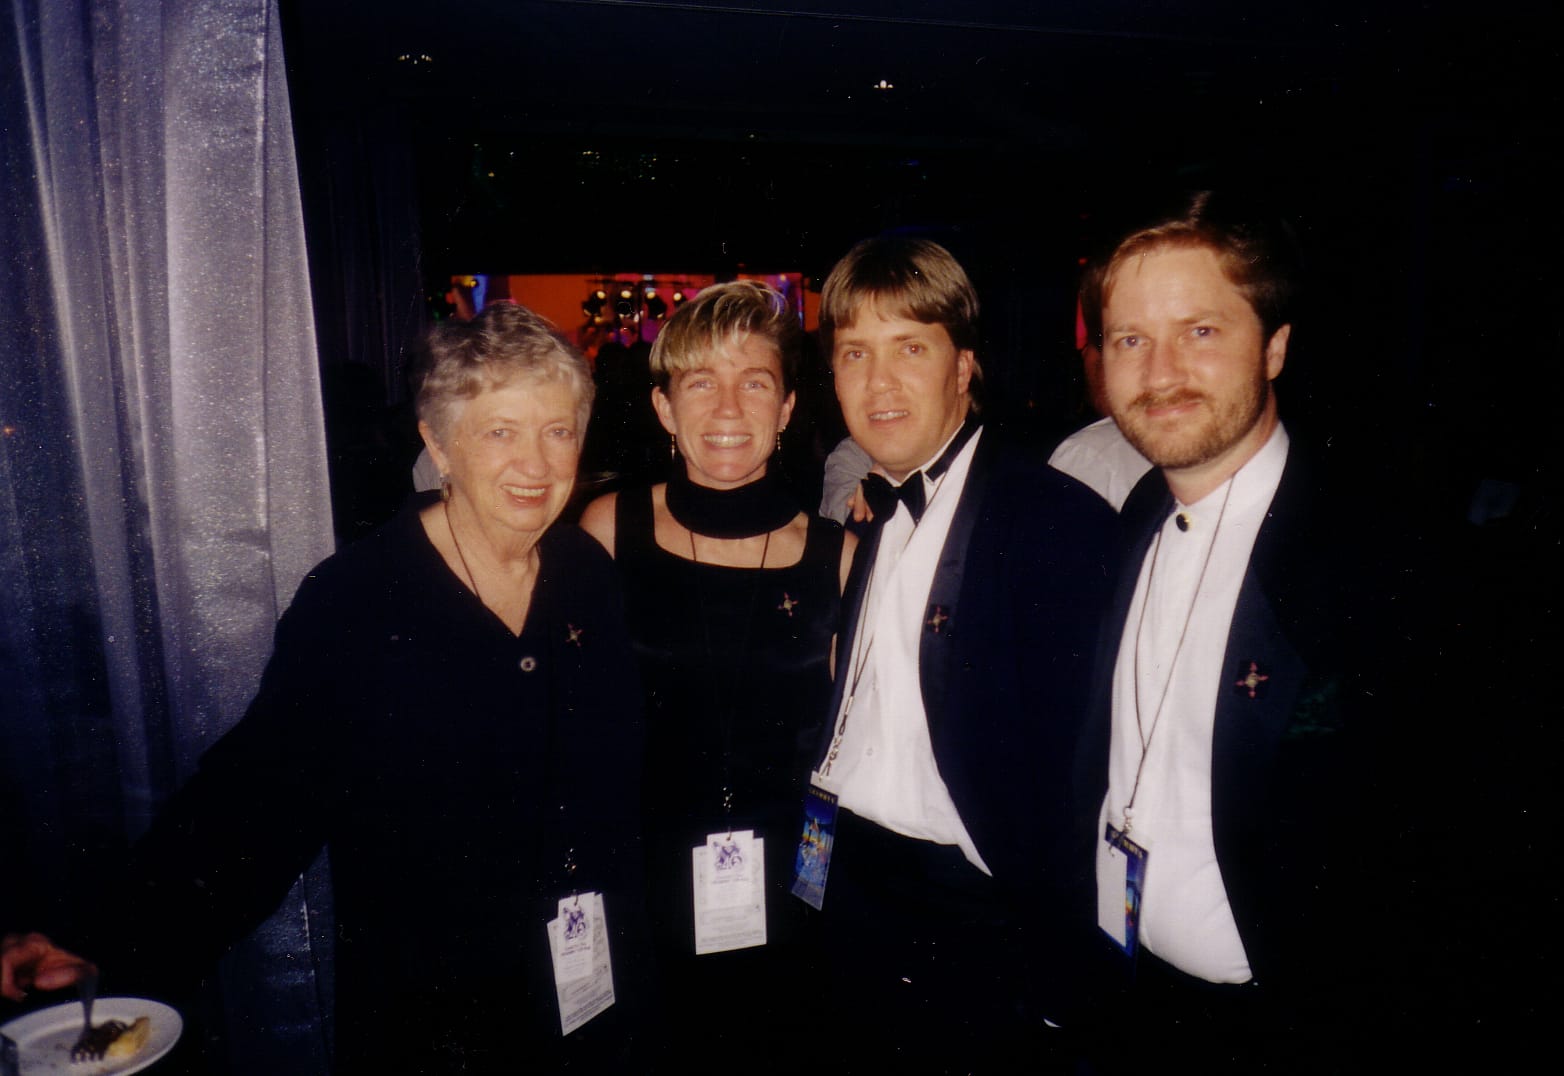 Michael's mother, Ruth, Sister Carol, brother Brendan and Craig at the 1998 Grammy Awards.